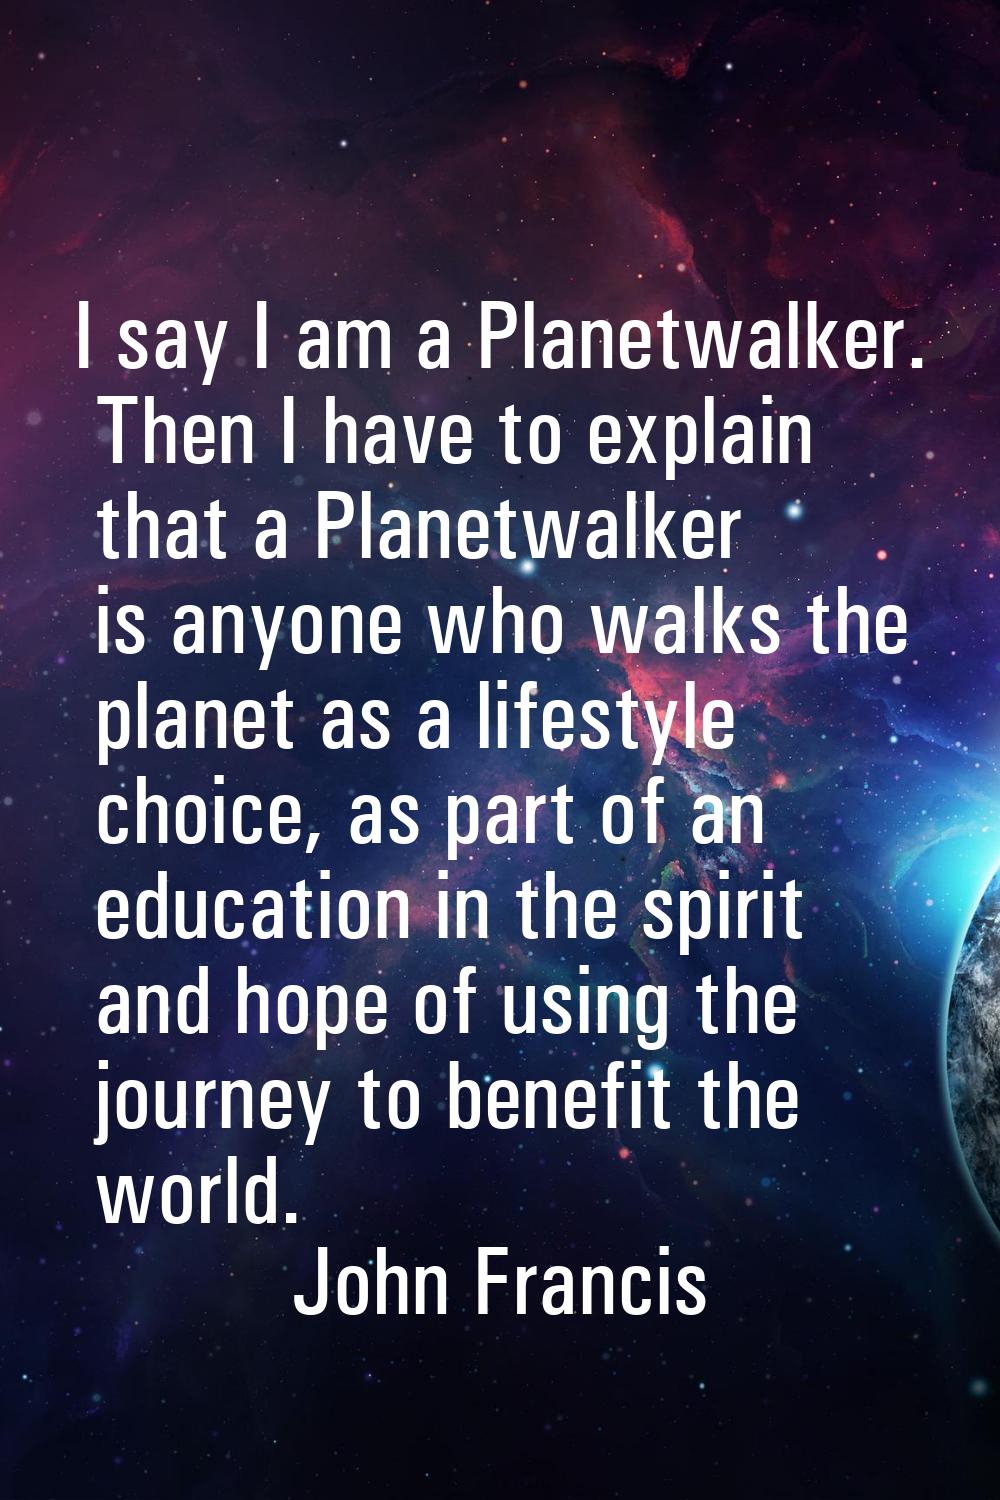 I say I am a Planetwalker. Then I have to explain that a Planetwalker is anyone who walks the plane